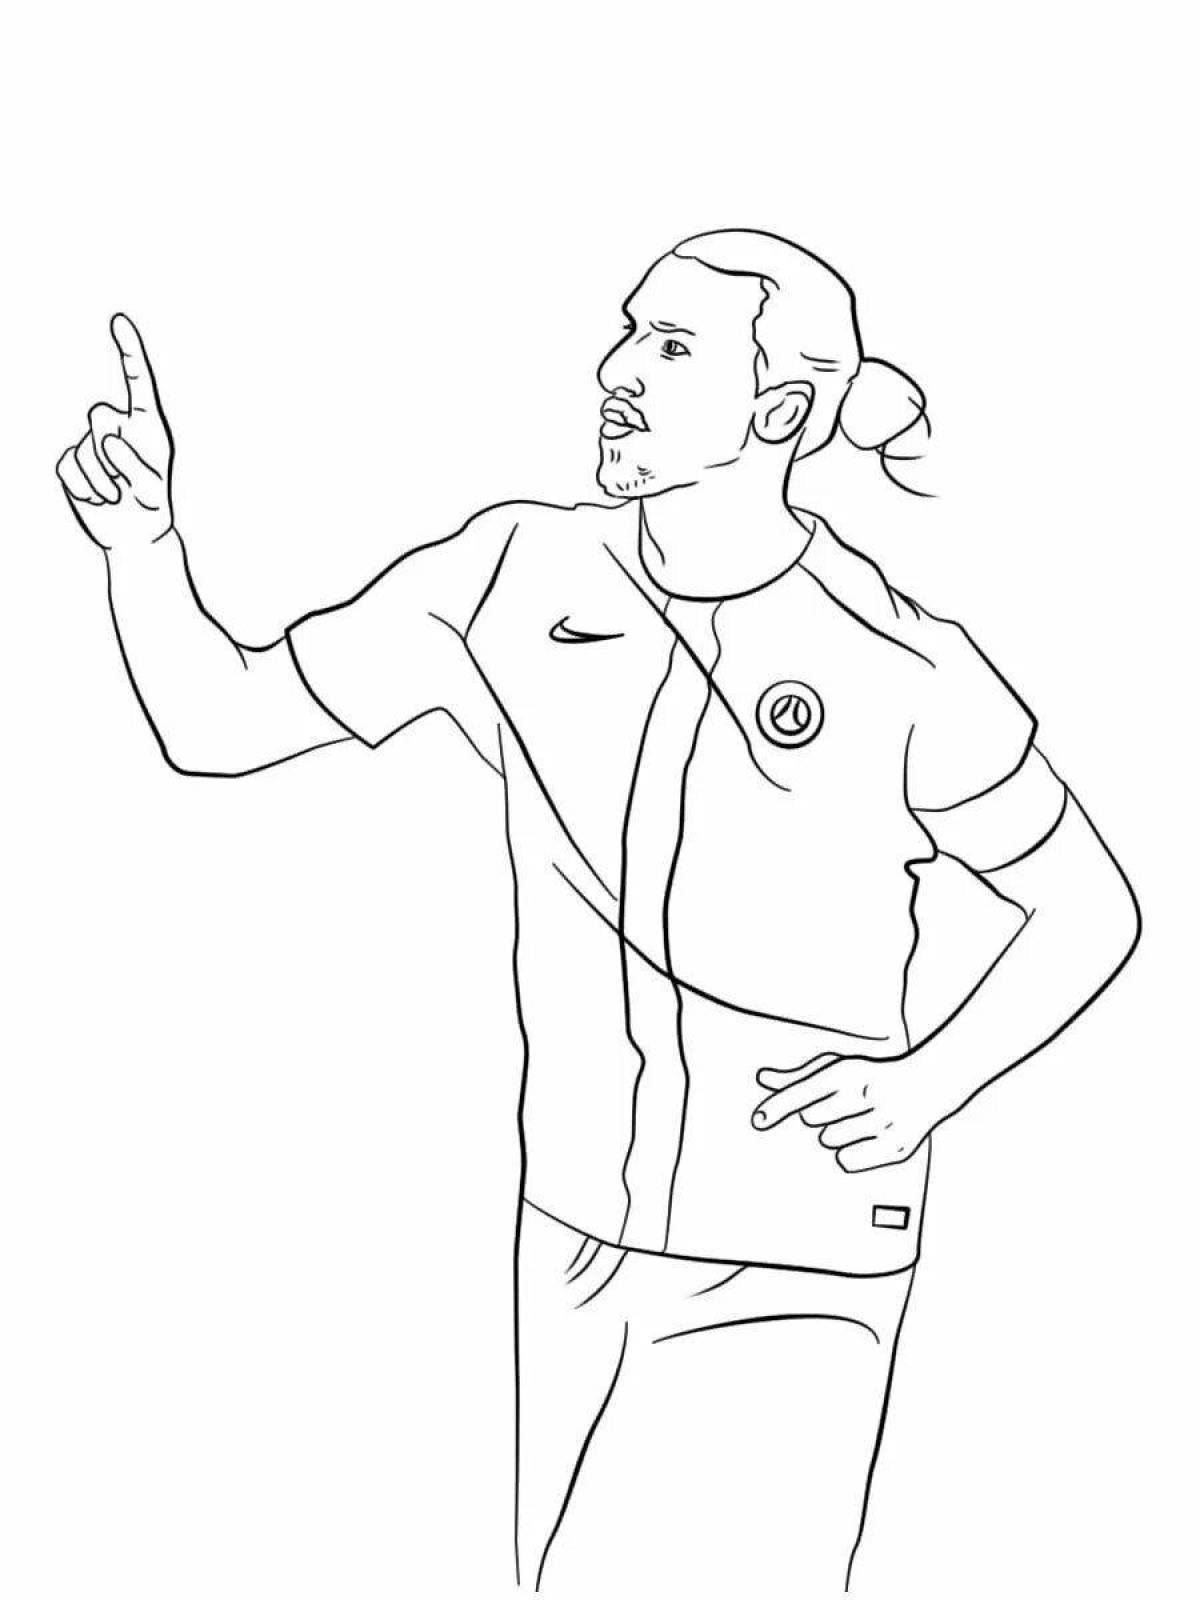 Zlatan Ibrahimovic's colorfully crafted coloring page